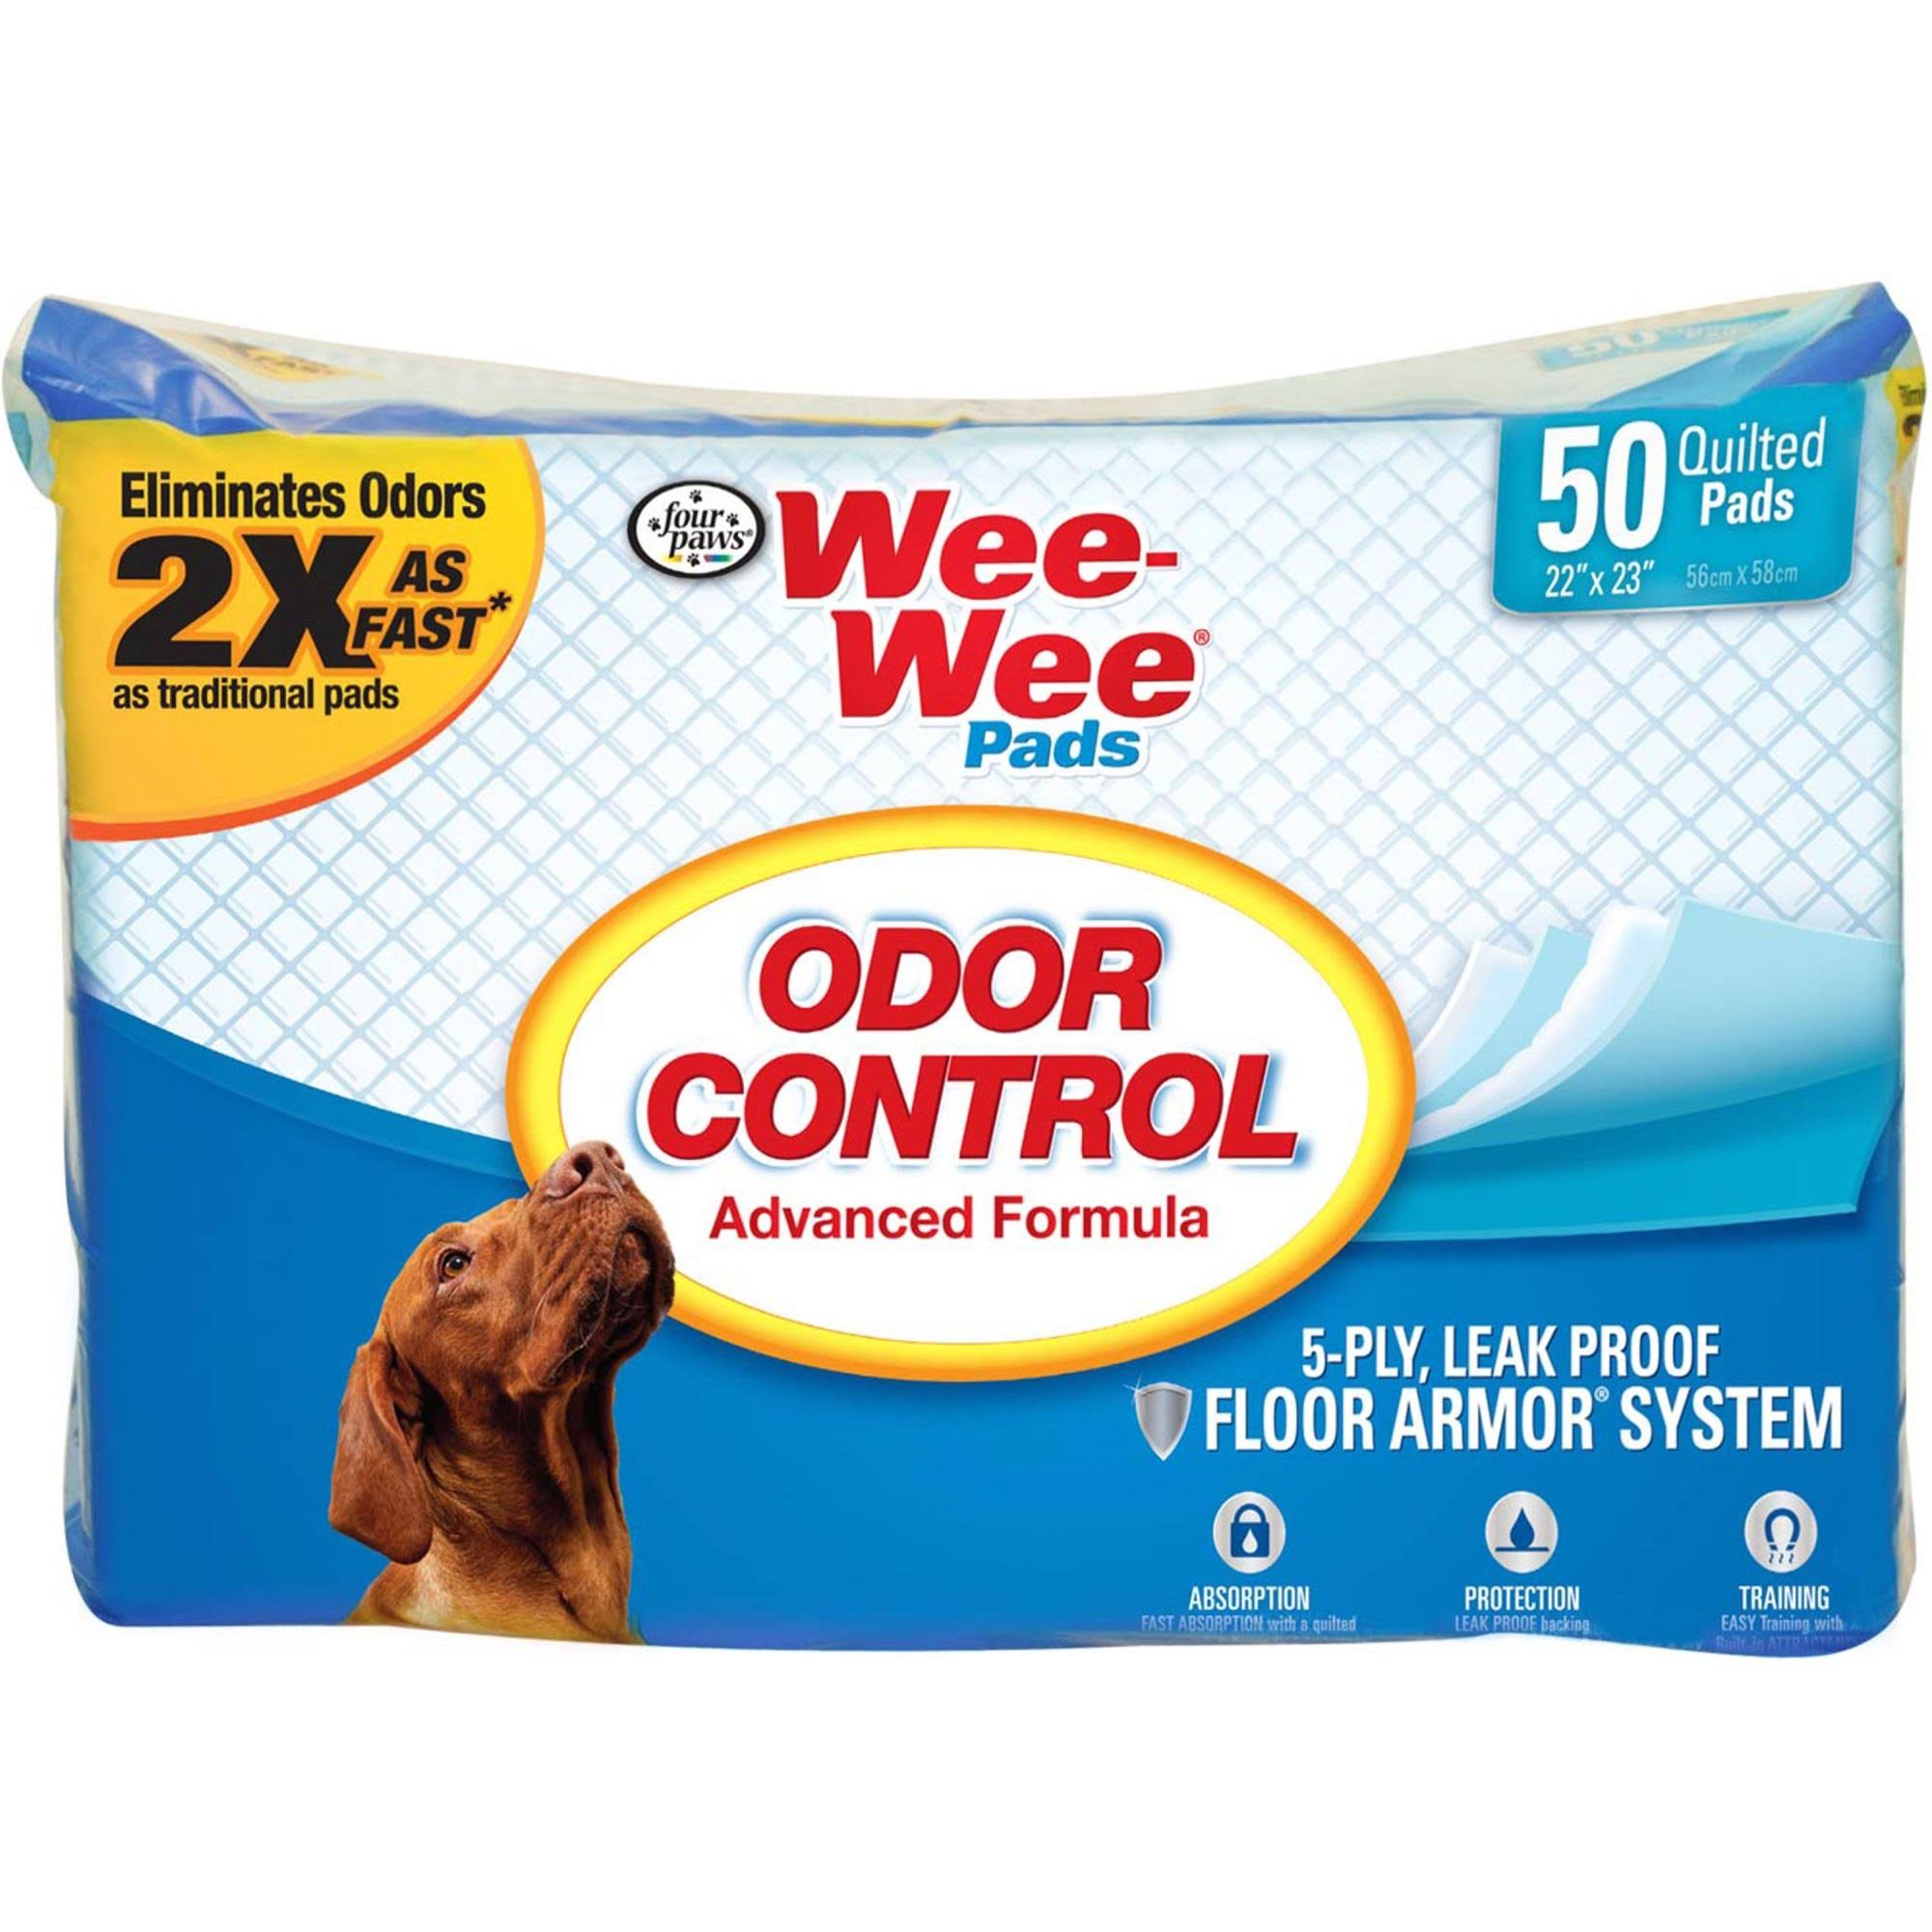 Four Paws Wee-Wee Odor Control Puppy Pads - 50 Pack